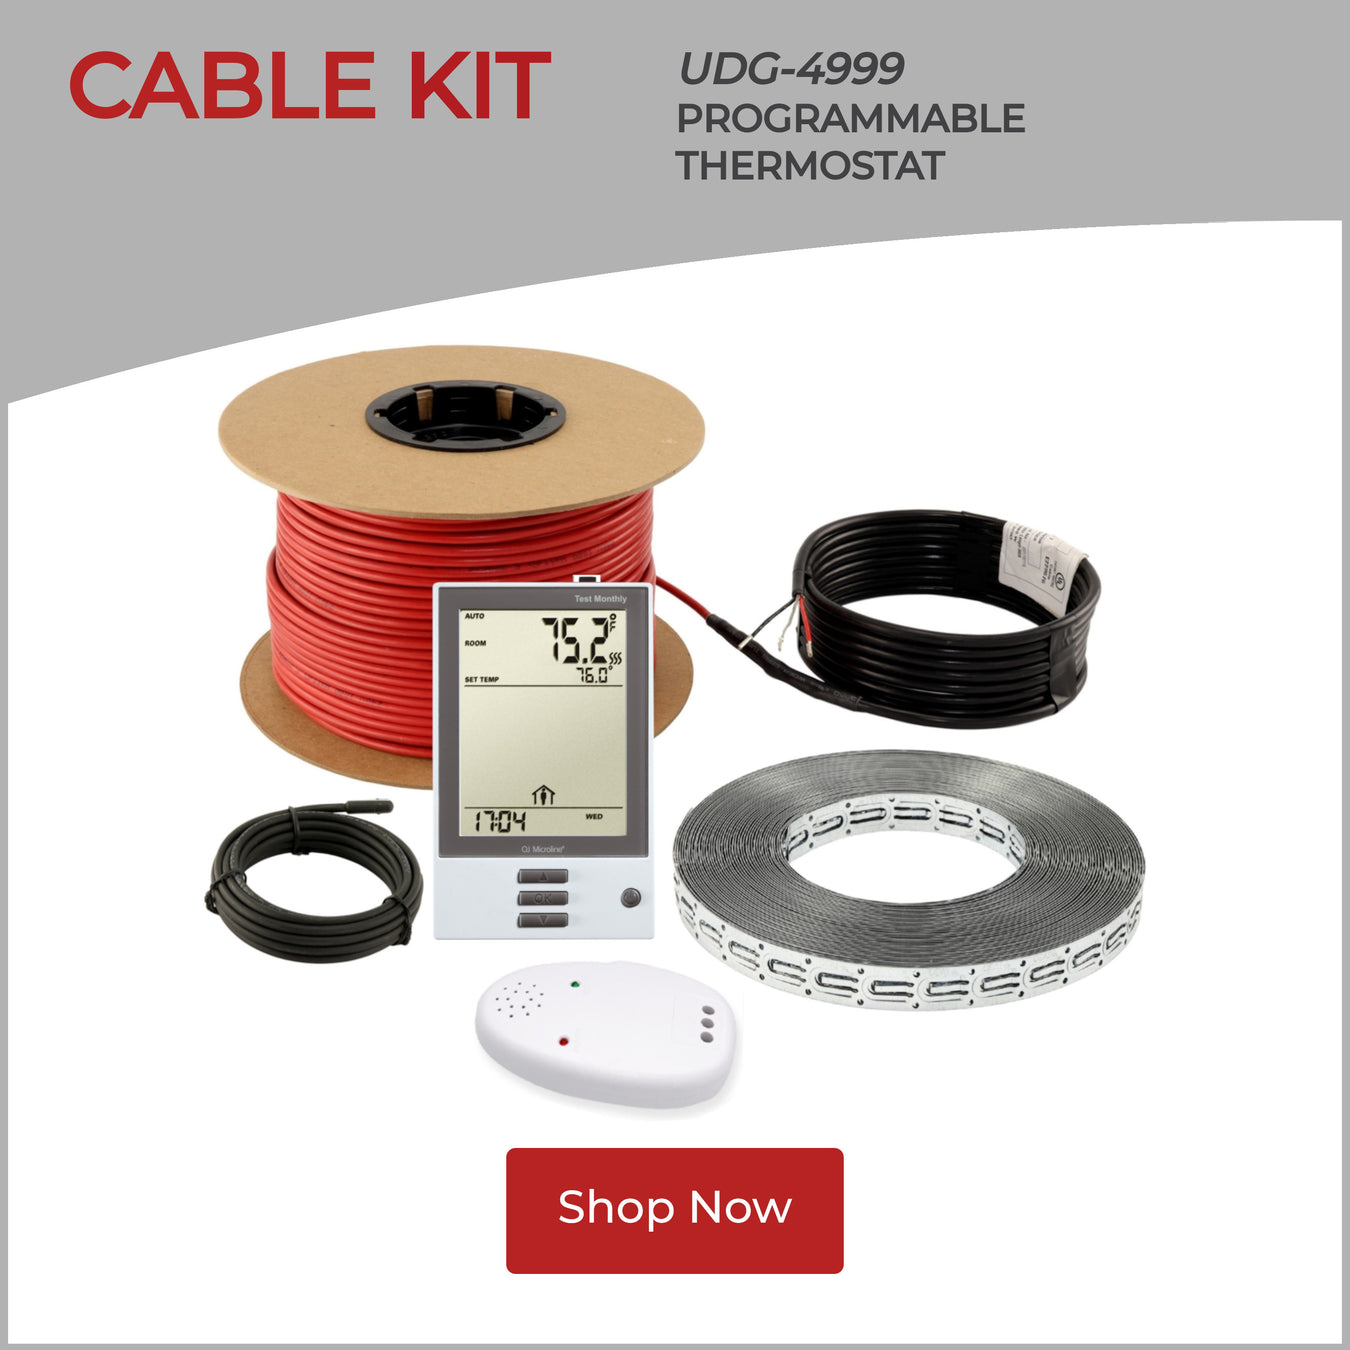 Overview_-_Cable_Kit_with_UDG_Strapping